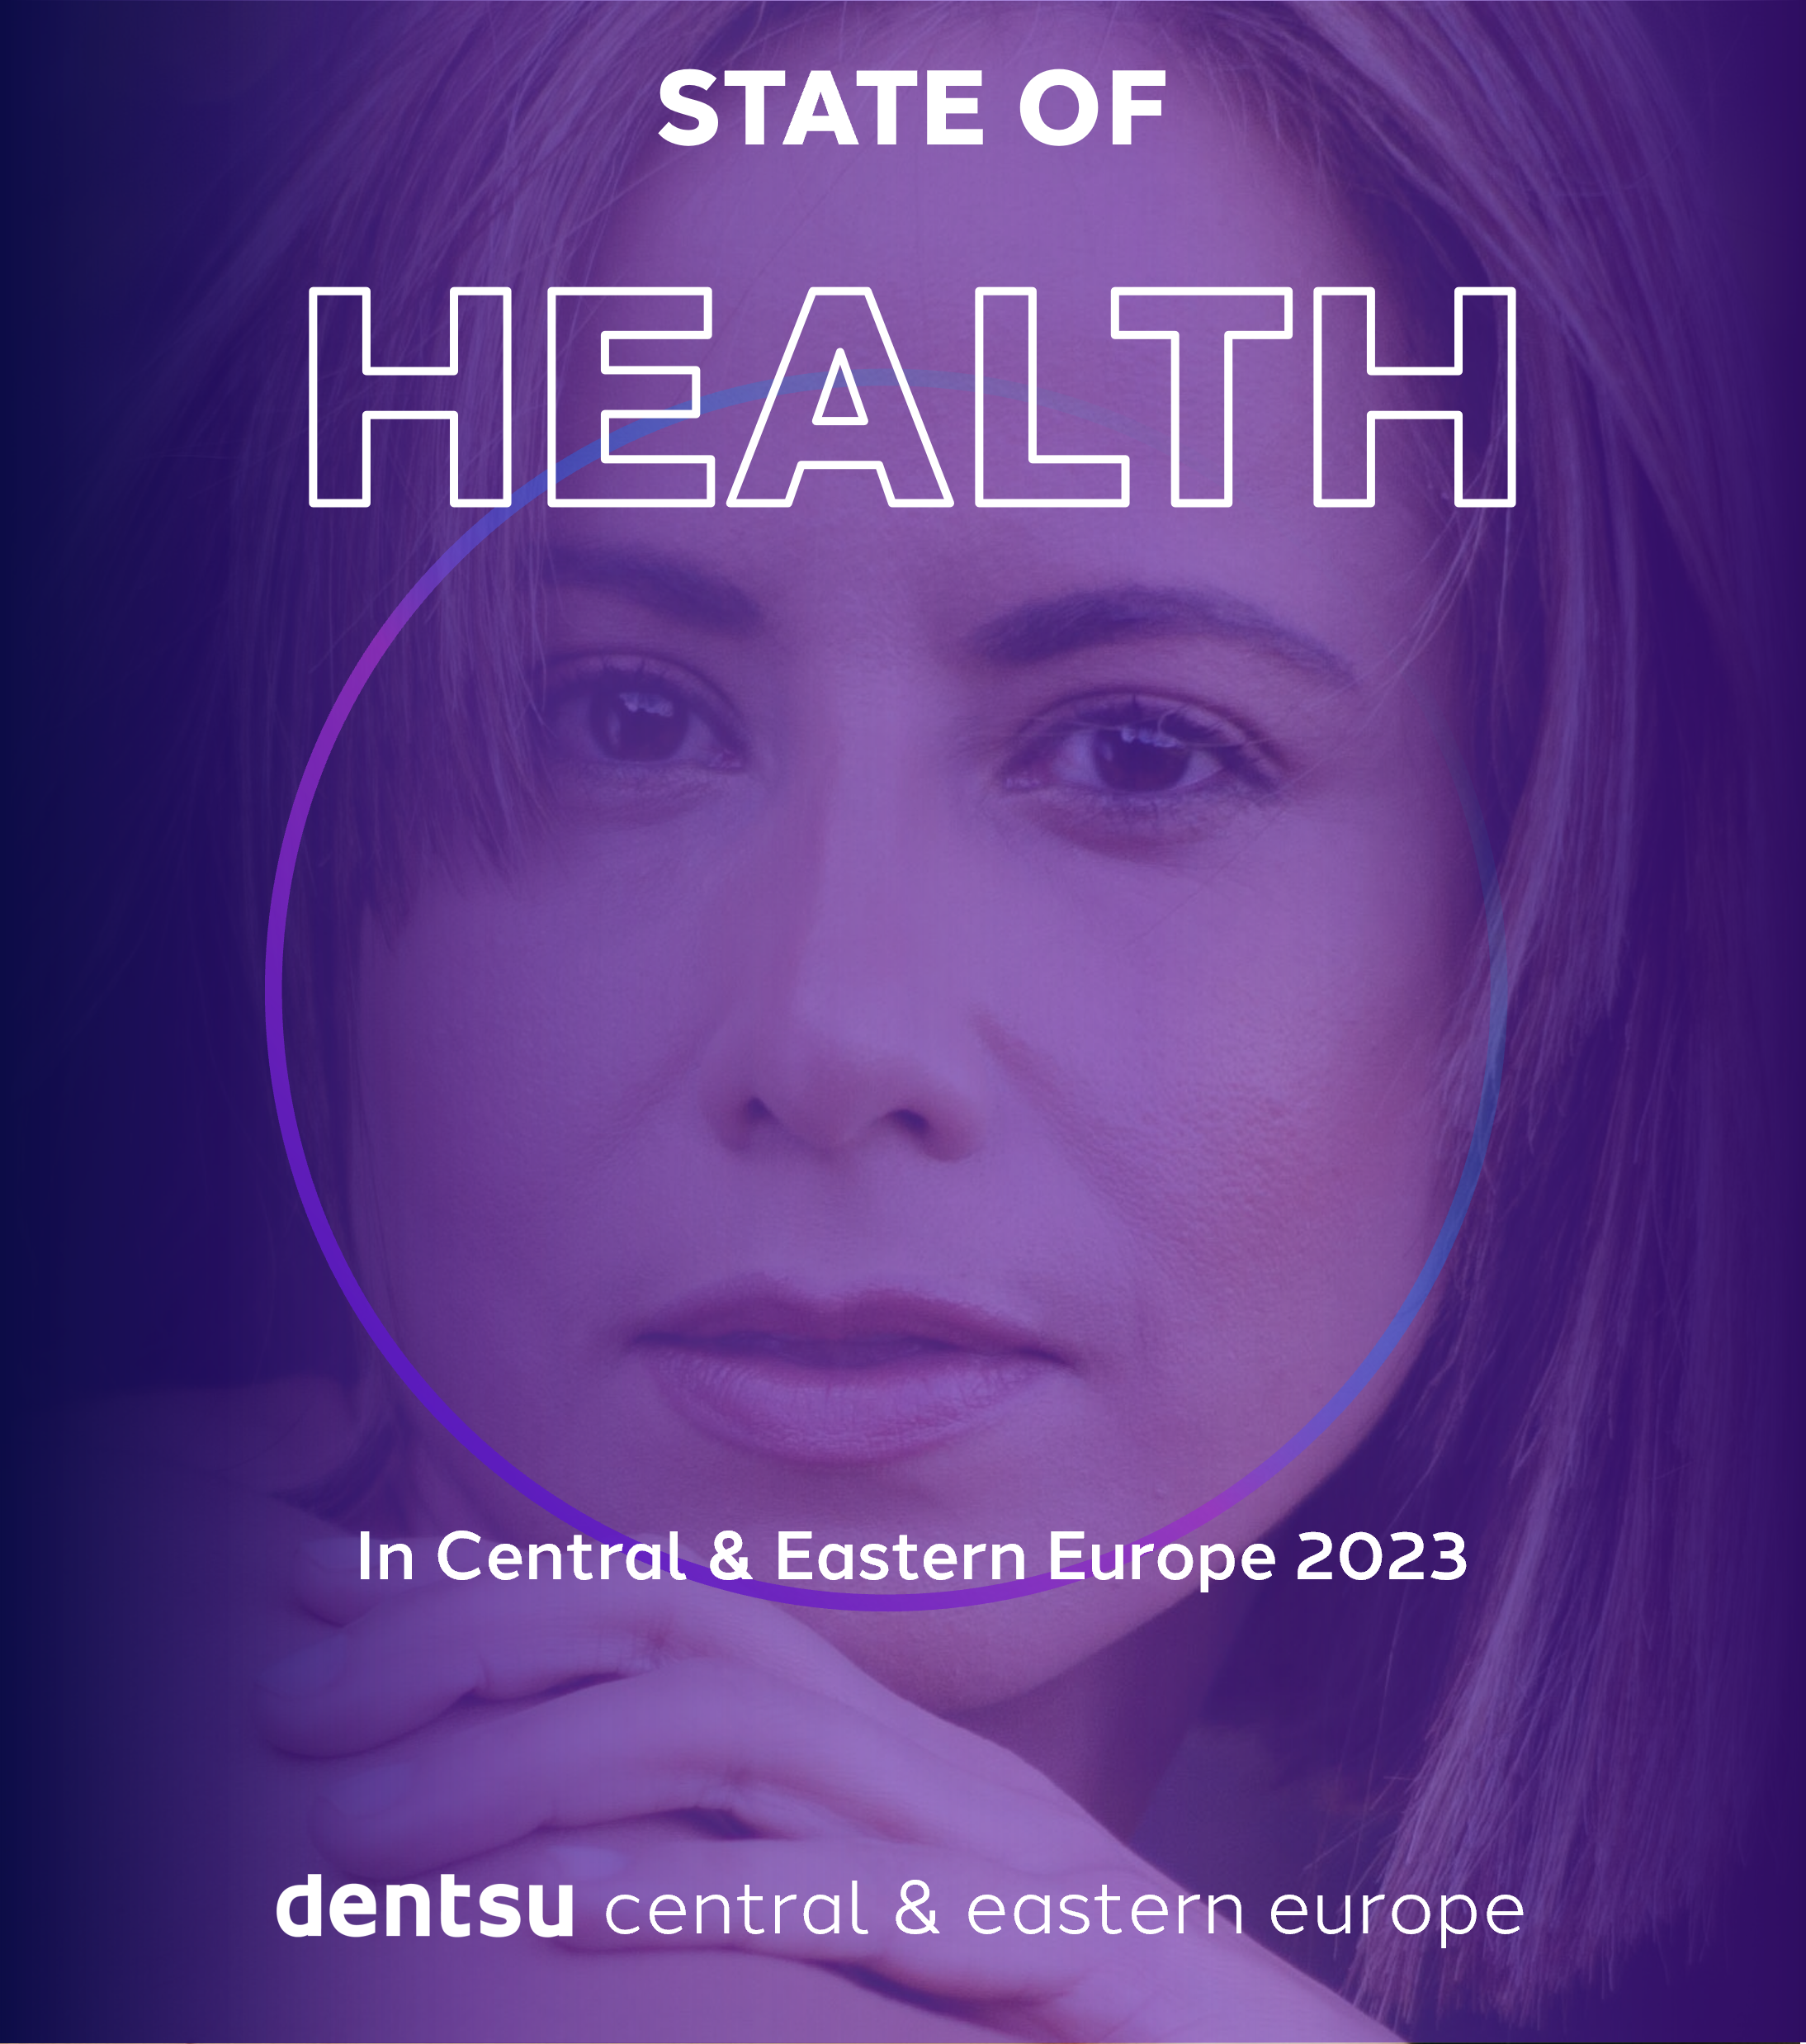 State of Health in CEE